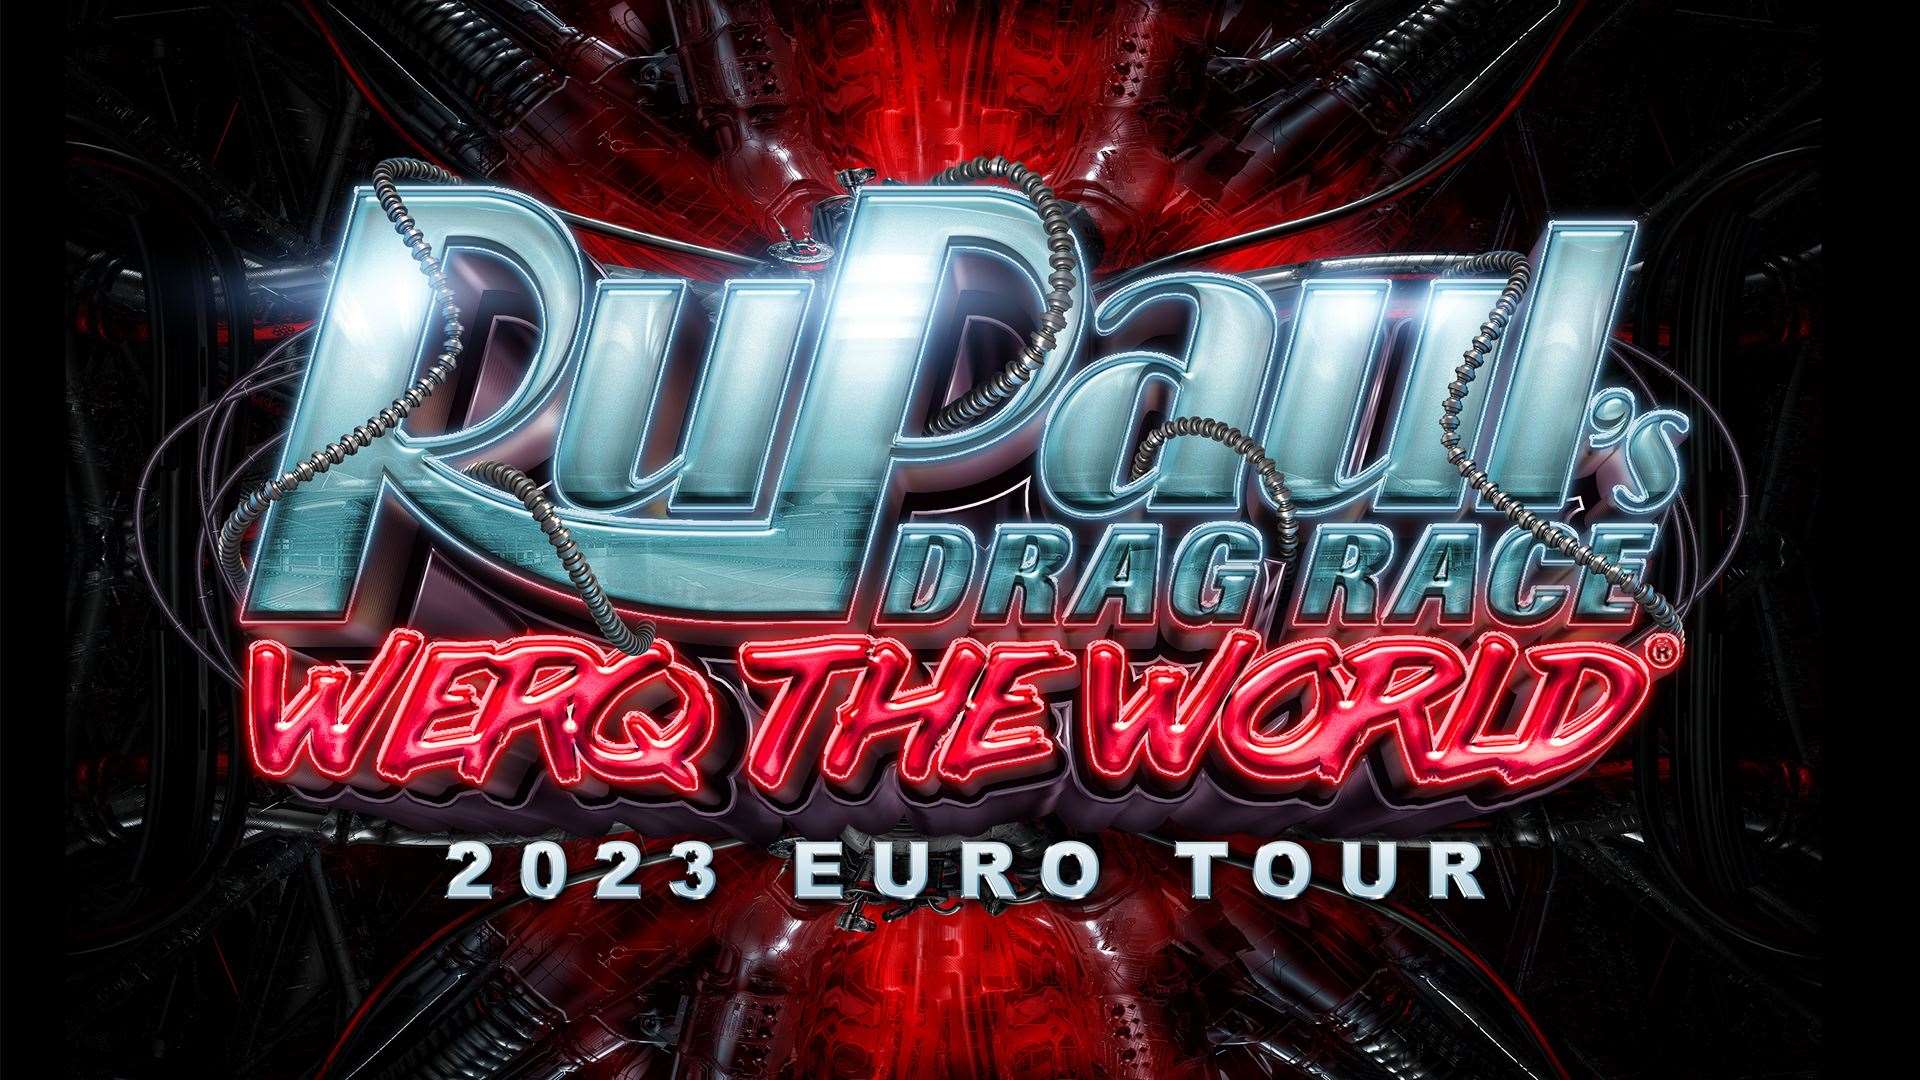 RuPaul's Drag Race Werq The World Tour came to Scotland this month.